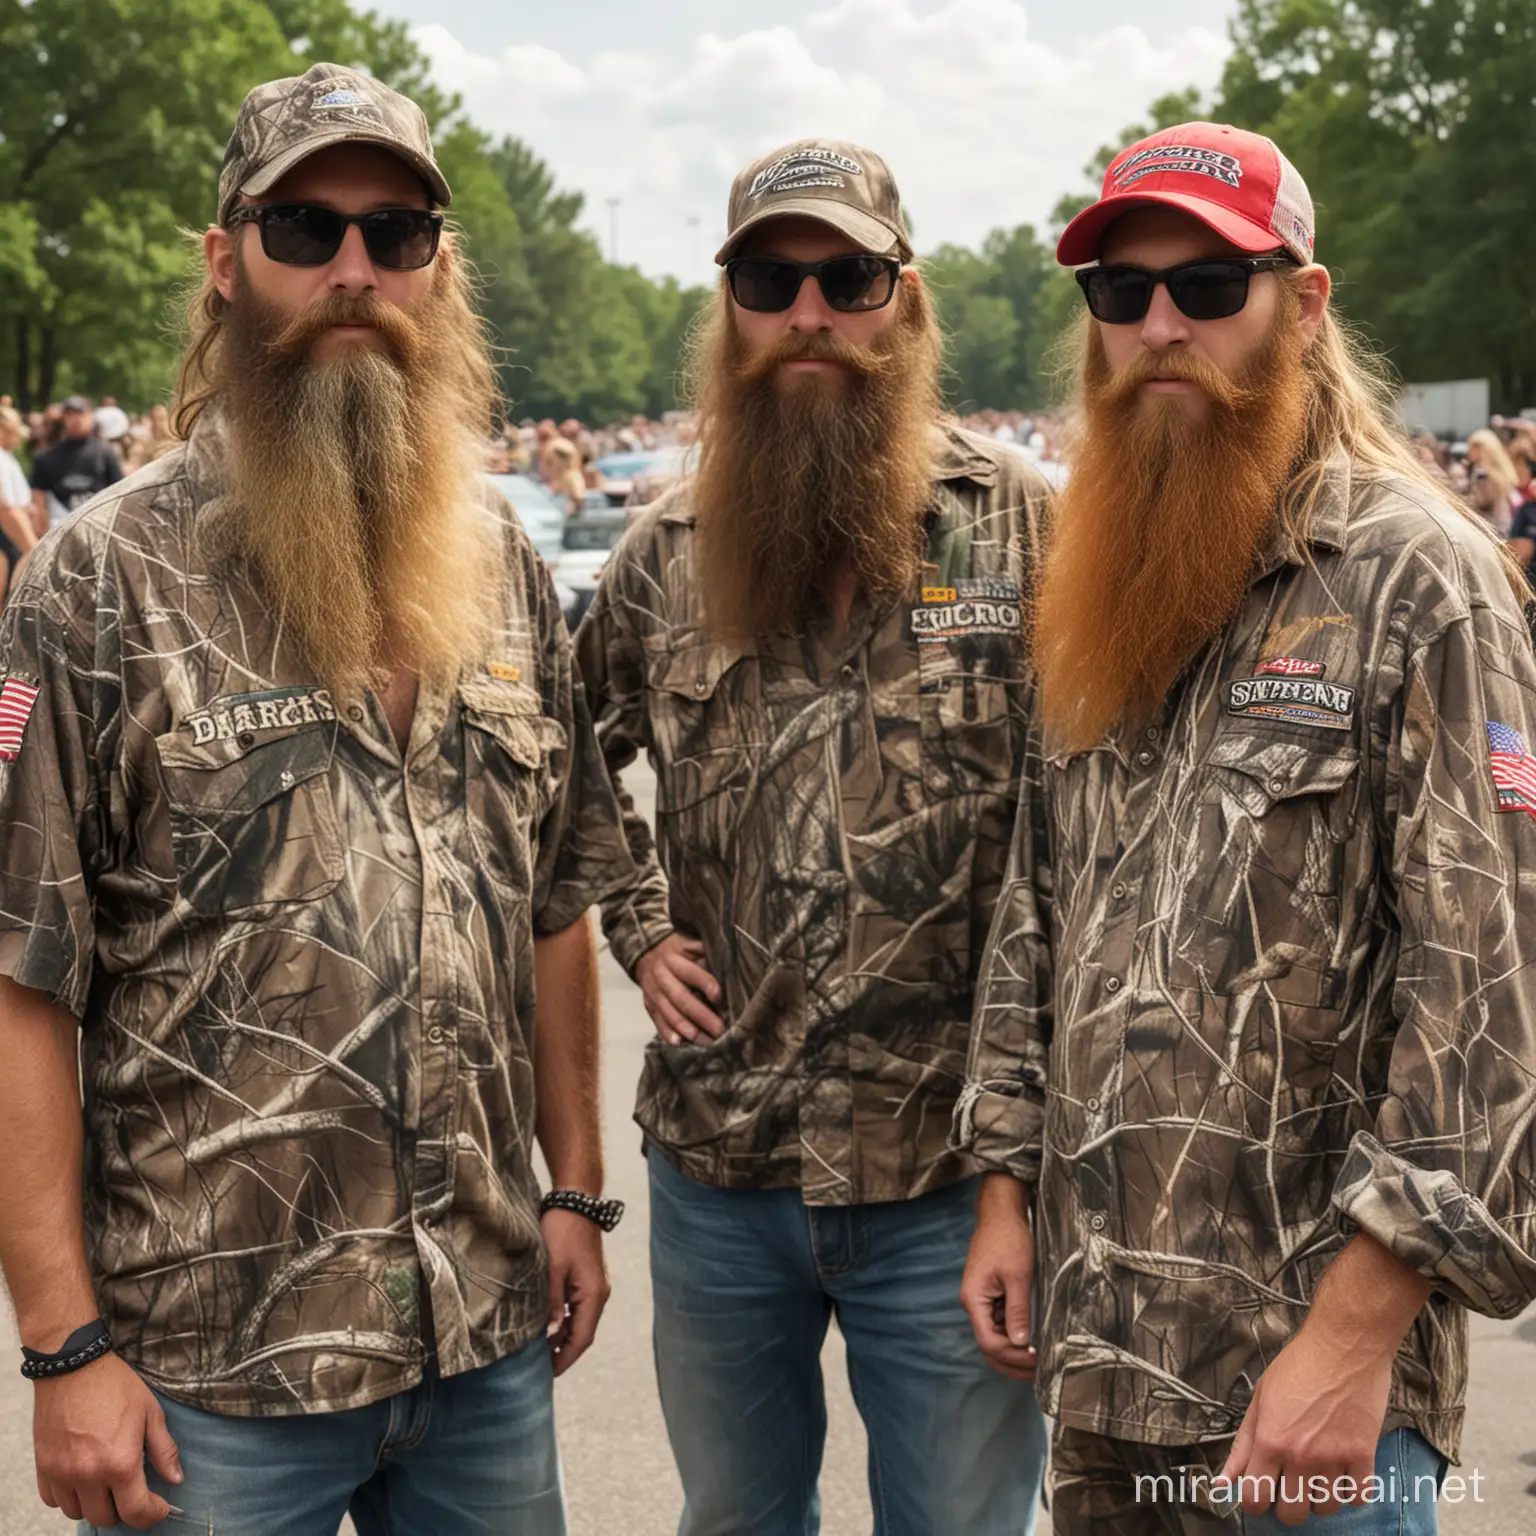 American southern rednecks with long beards, camo clothes, sunglasses, nascar fans